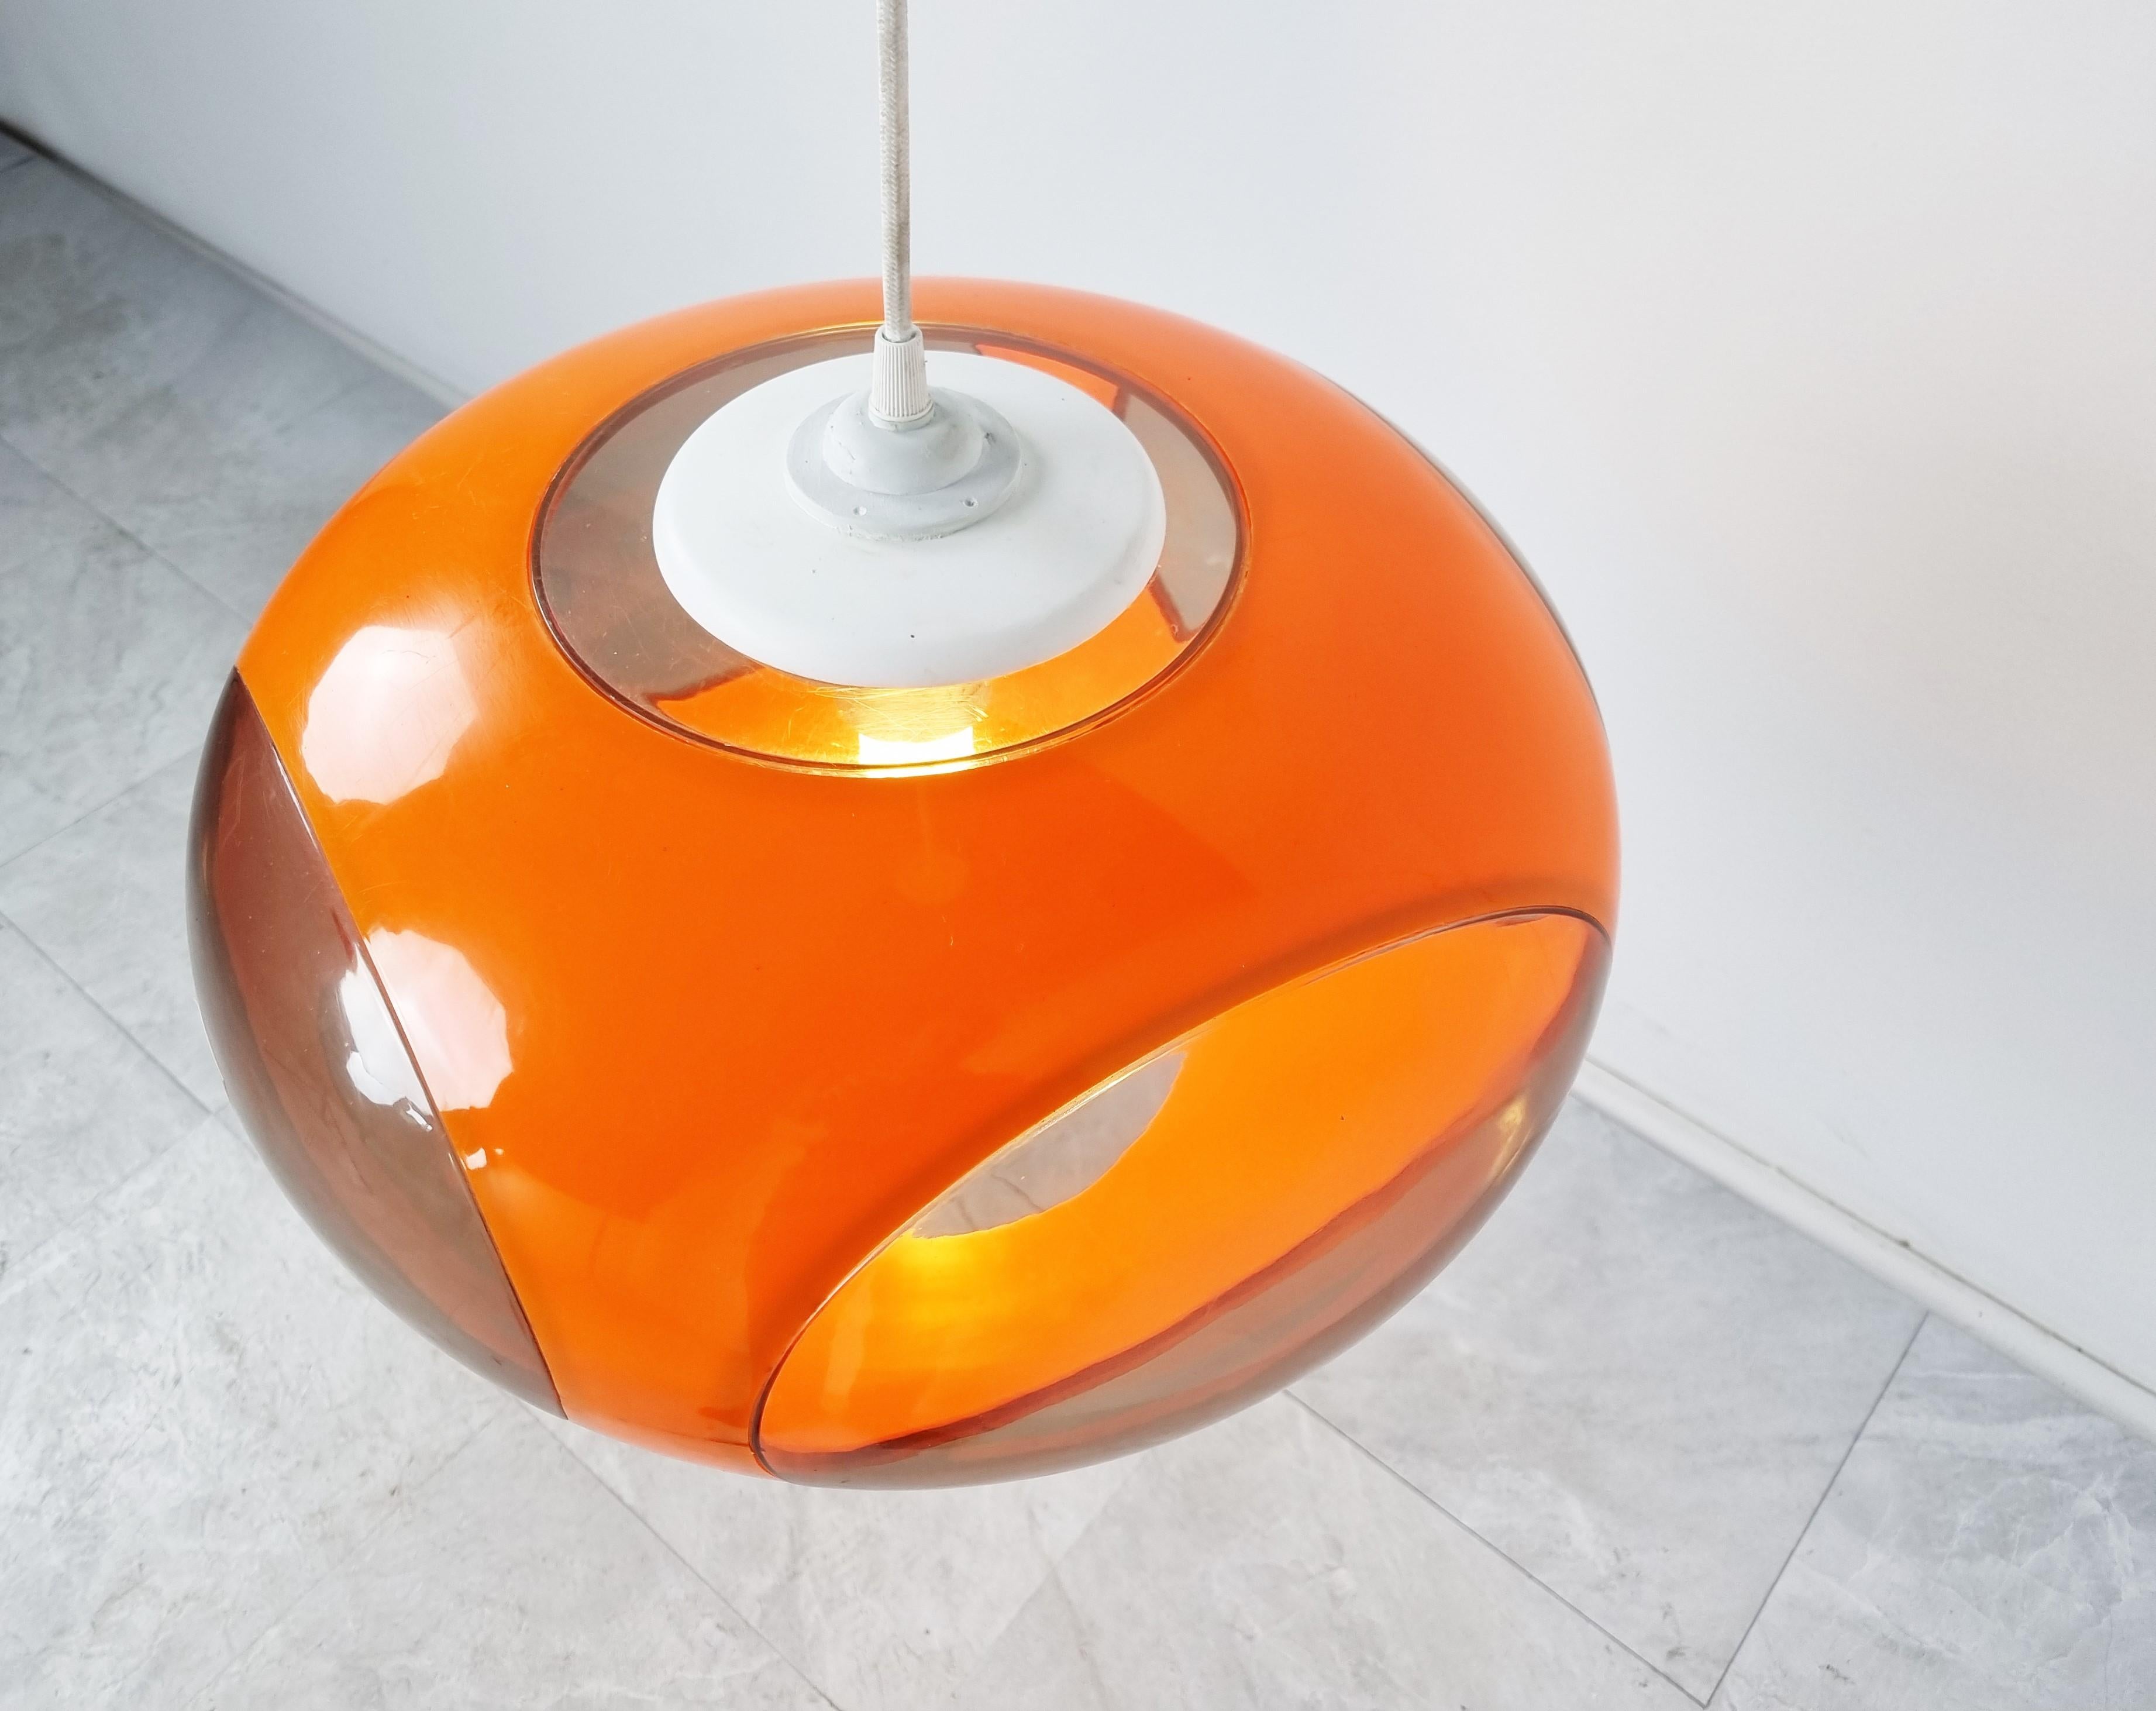 Mid century space age 'bug eye' or ufo pendant light by Massive.

The lamp is mostly referred to as Luigi Colani design but is not correct. These where produced in Belgium by a lighting company called Massive.

Nevertheless it is a great original